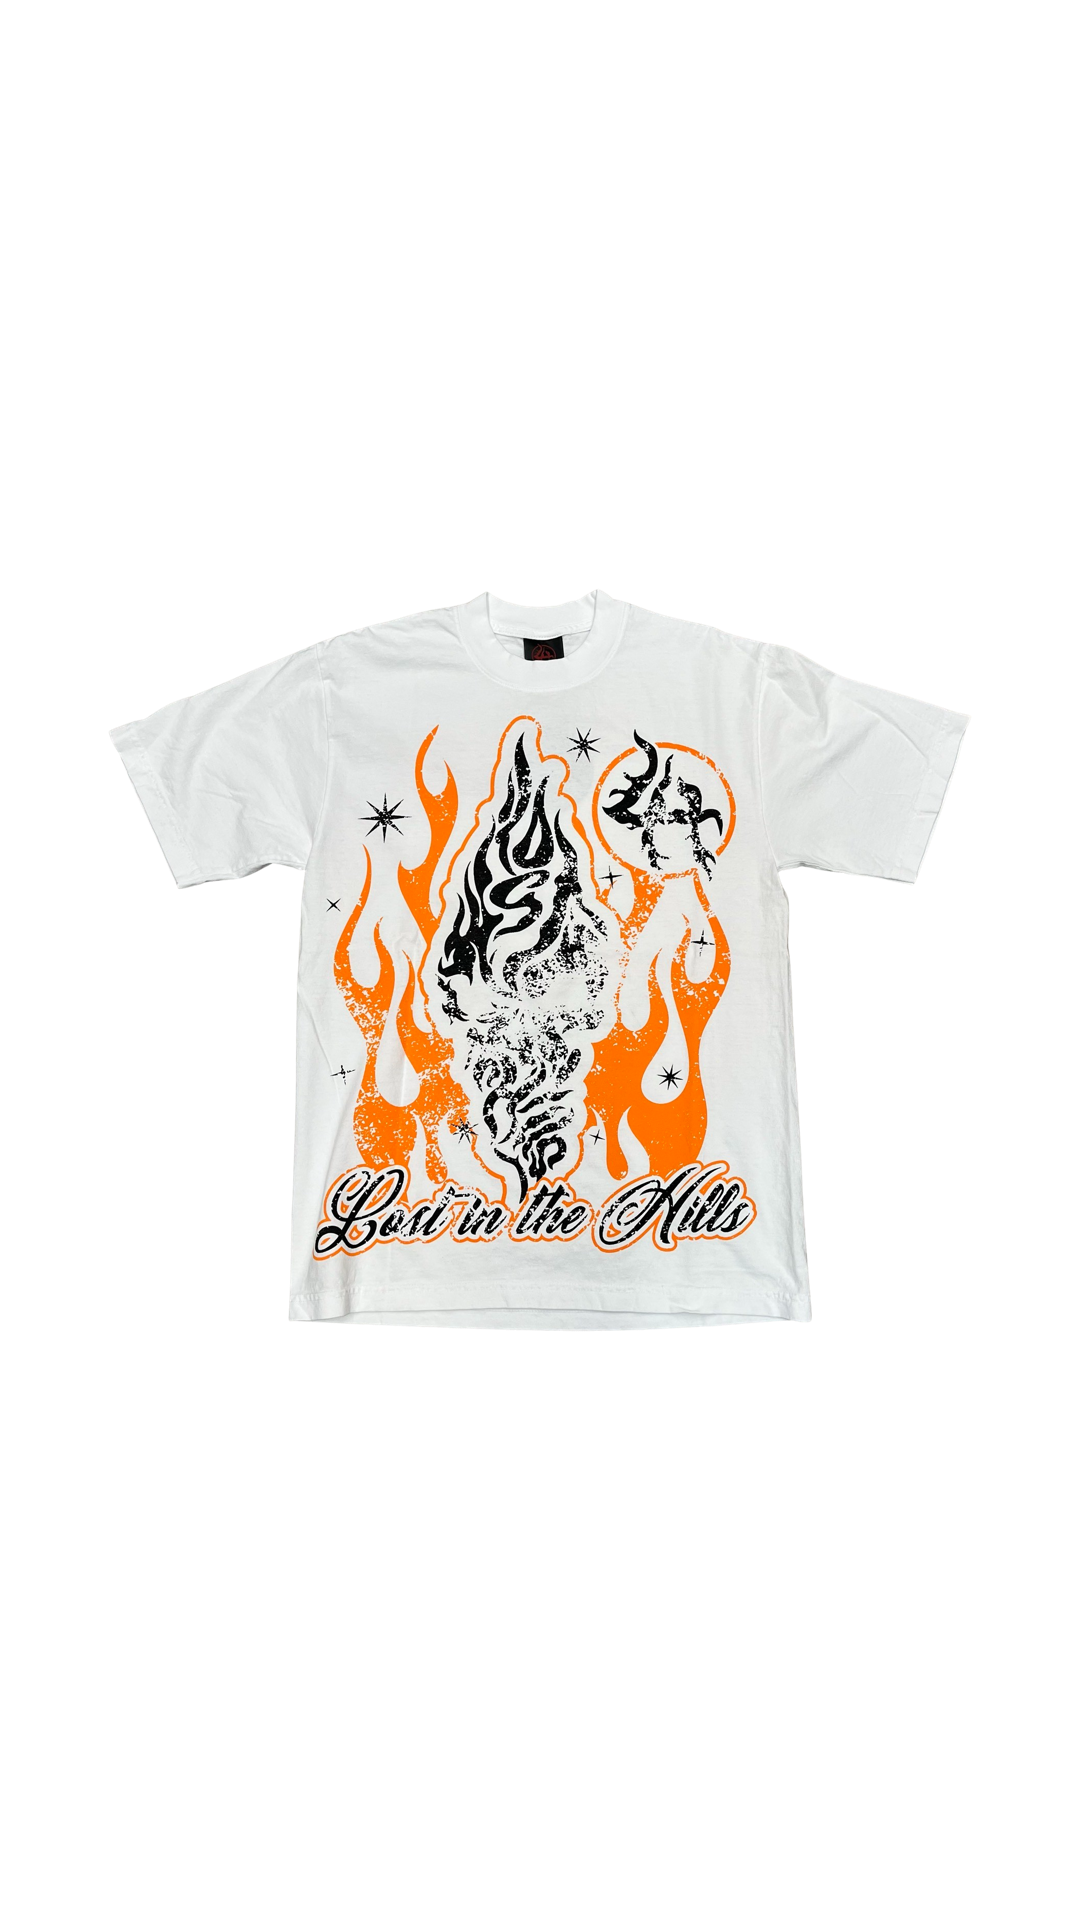 Lost Hills “Lith” tee (white)